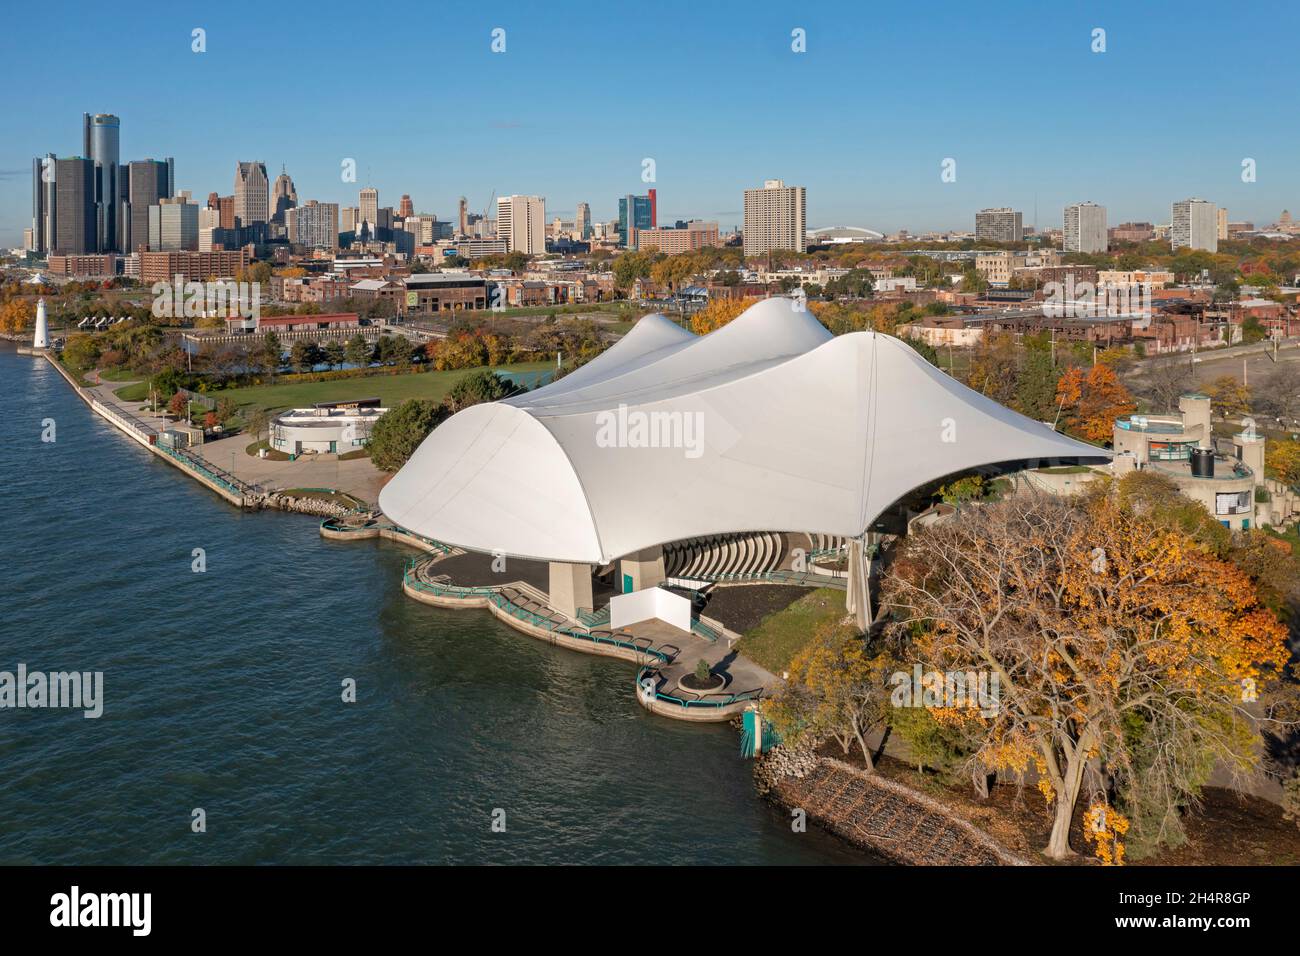 Detroit, Michigan - The Aretha Franklin Amphitheatre on the Detroit River near downtown. The popular concert venue, owned by the city of Detroit, has Stock Photo